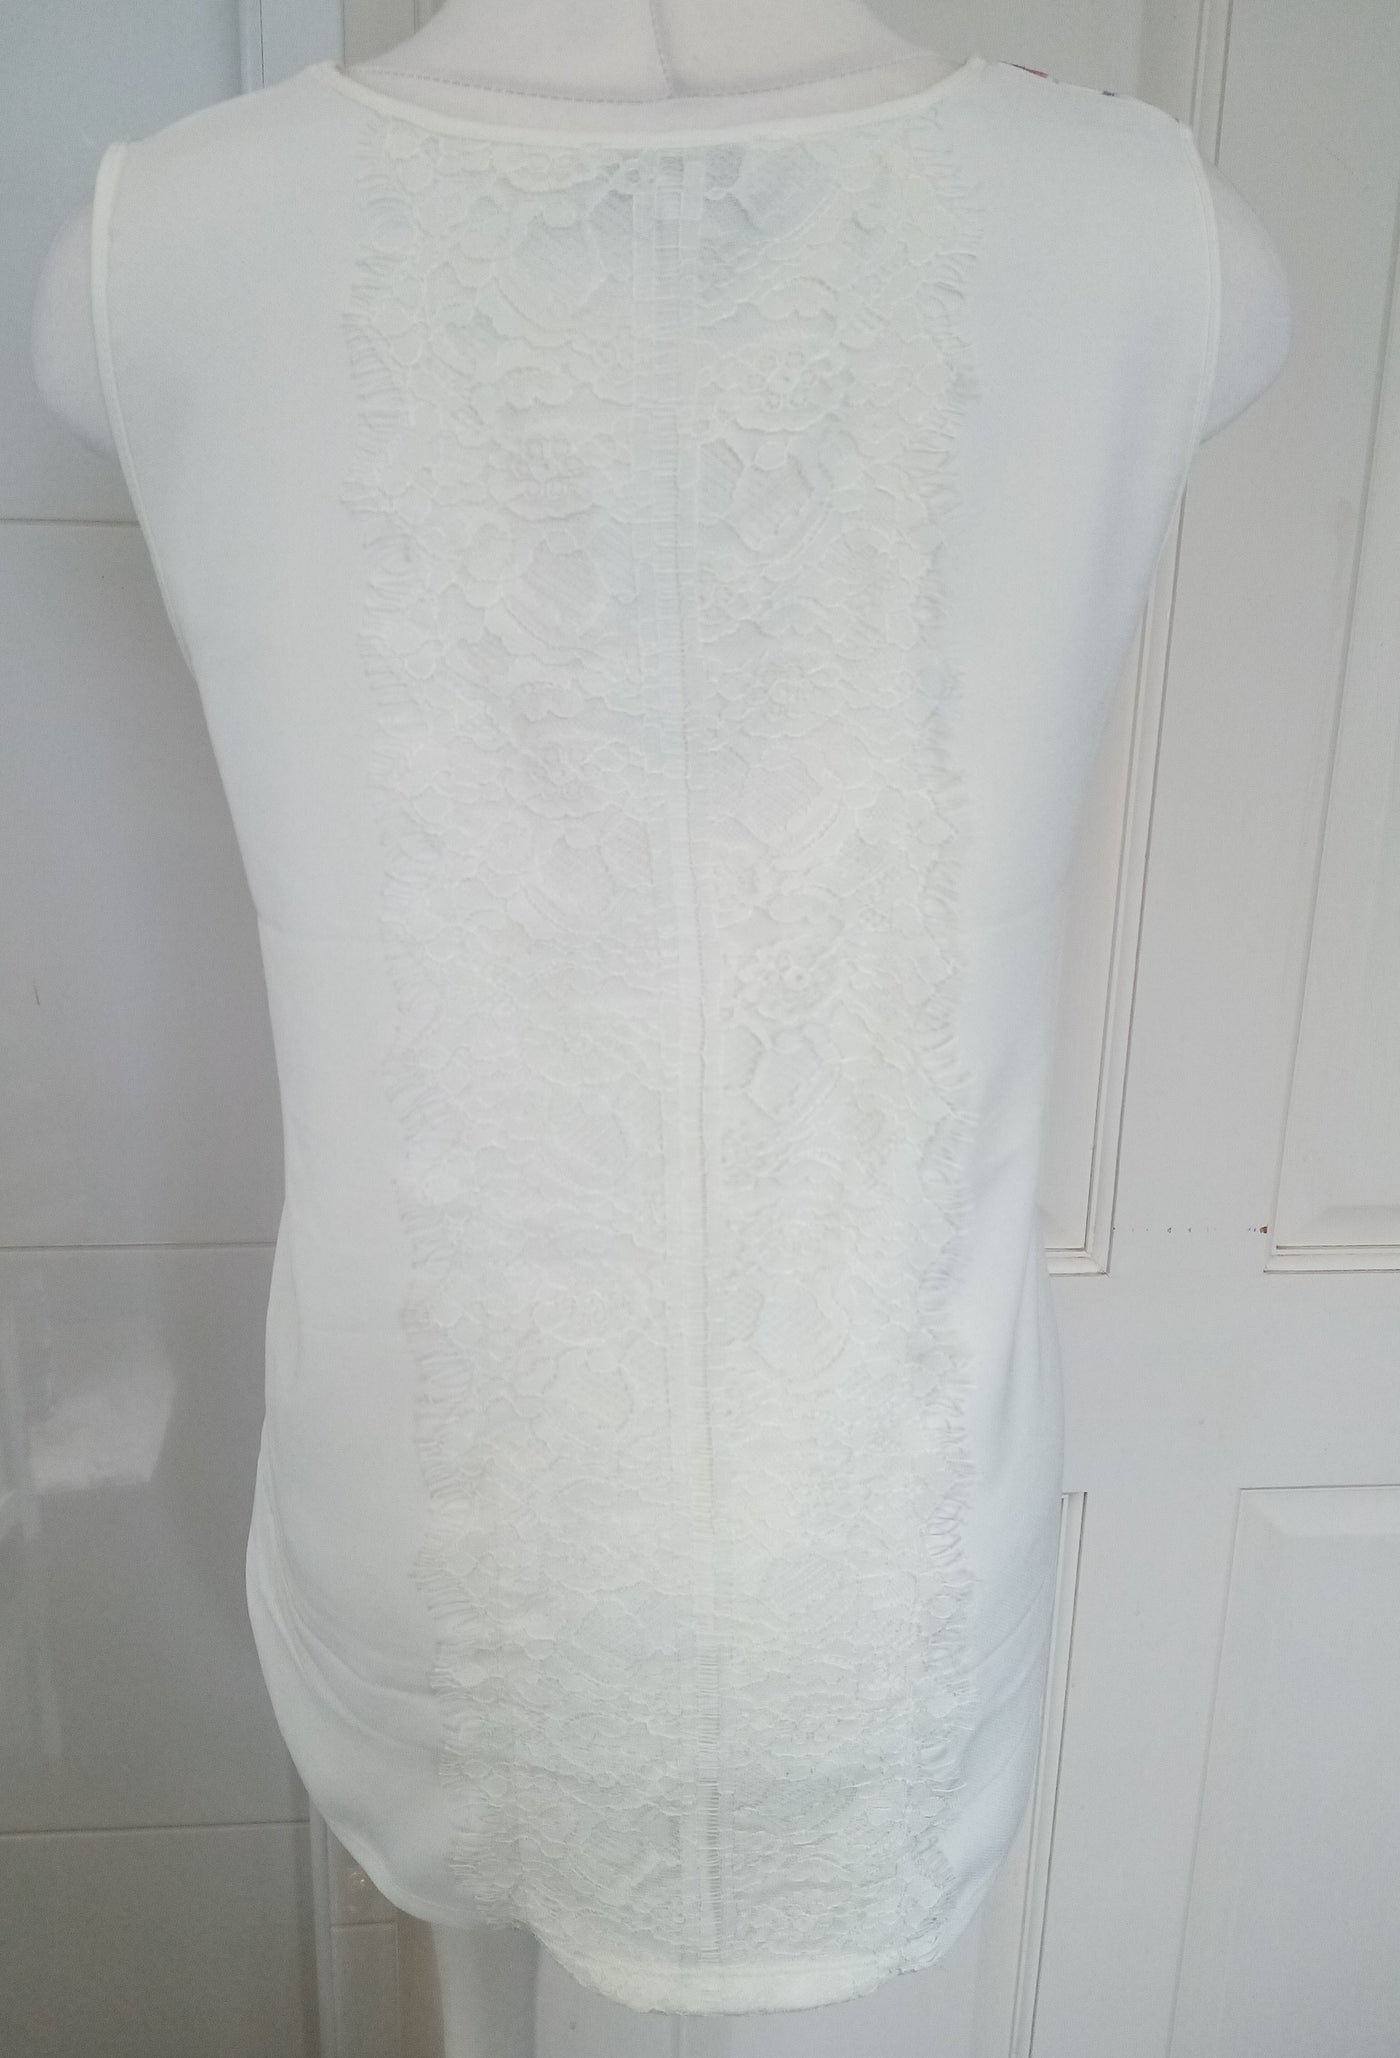 Next Maternity Cream Butterfly Top with Lace Back Panel (BNWT) - Size 14